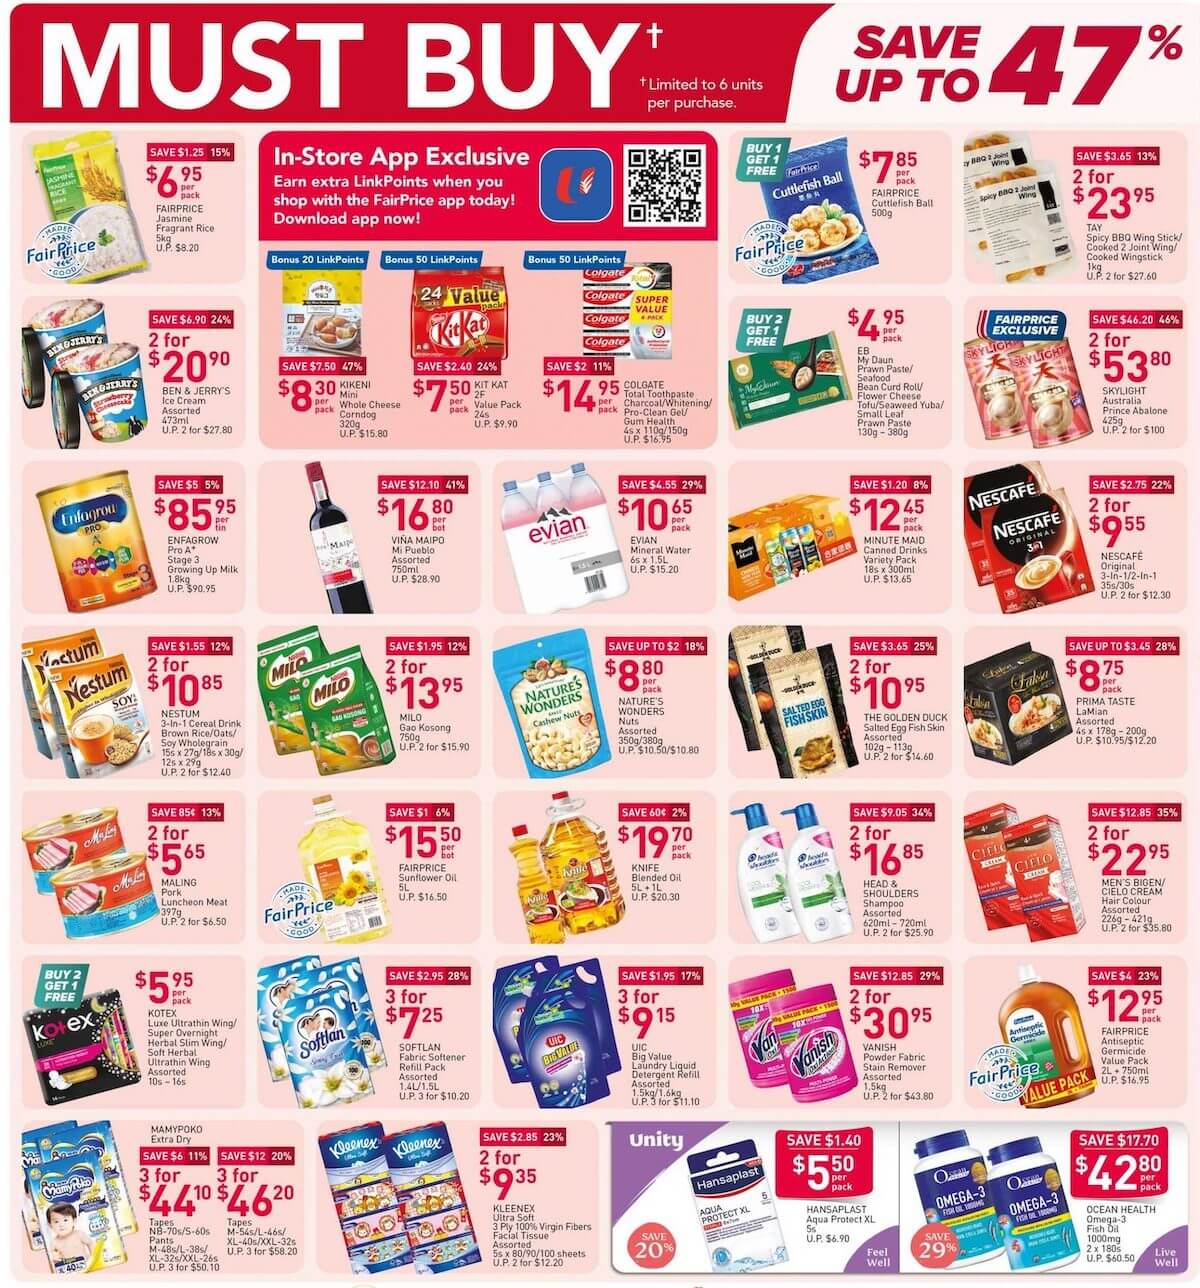 NTUC FairPrice,Weekly must buy save up to 47% off